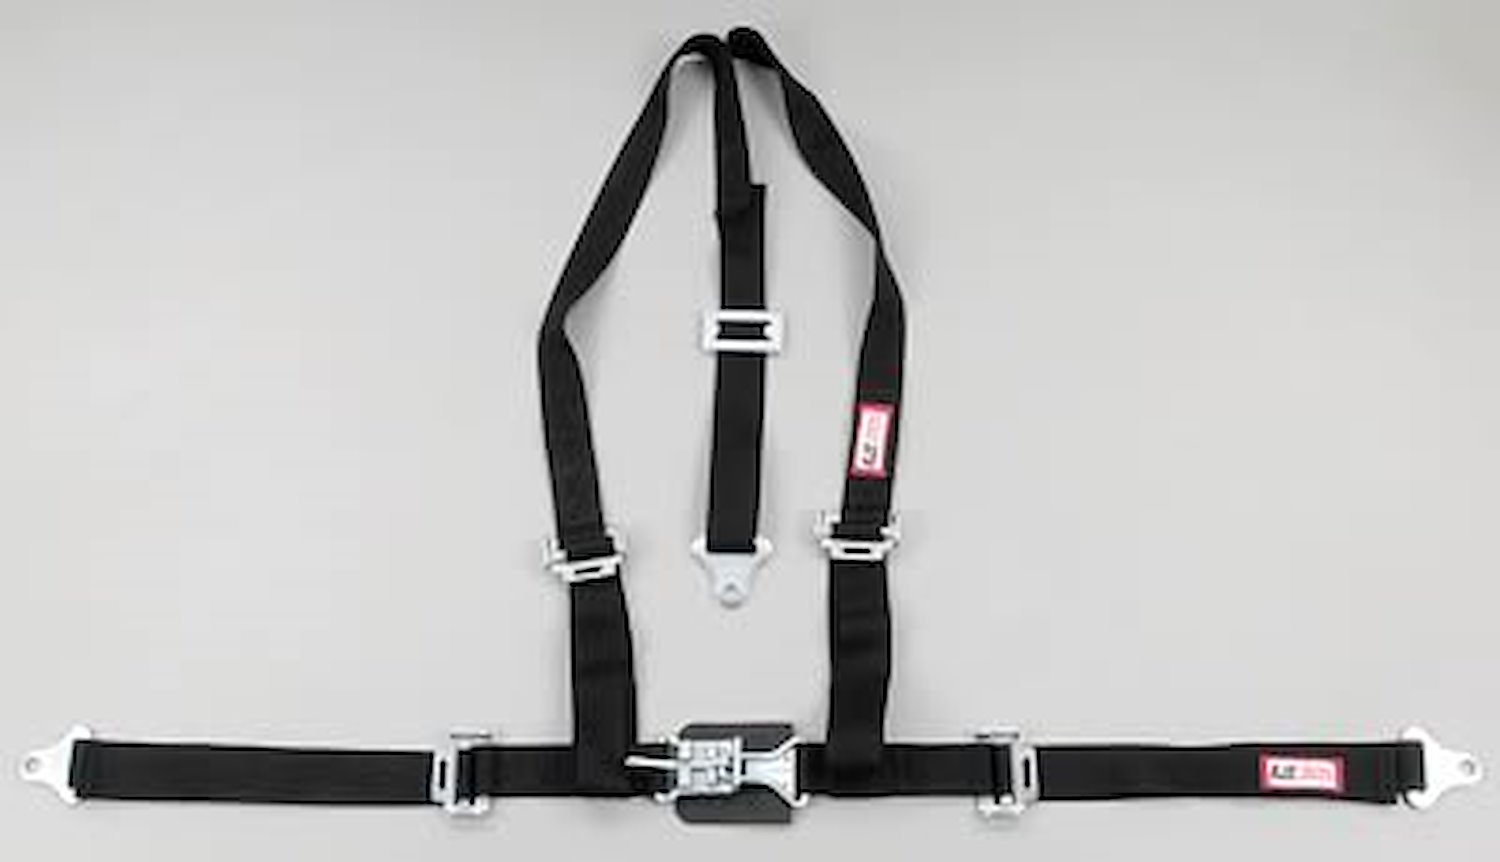 NON-SFI L&L HARNESS 2 PULL DOWN Lap Belt w/Adjuster SNAP 2 S.H. Y FLOOR MOUNT w/STERNUM STRAP WRAP/BOLT RED